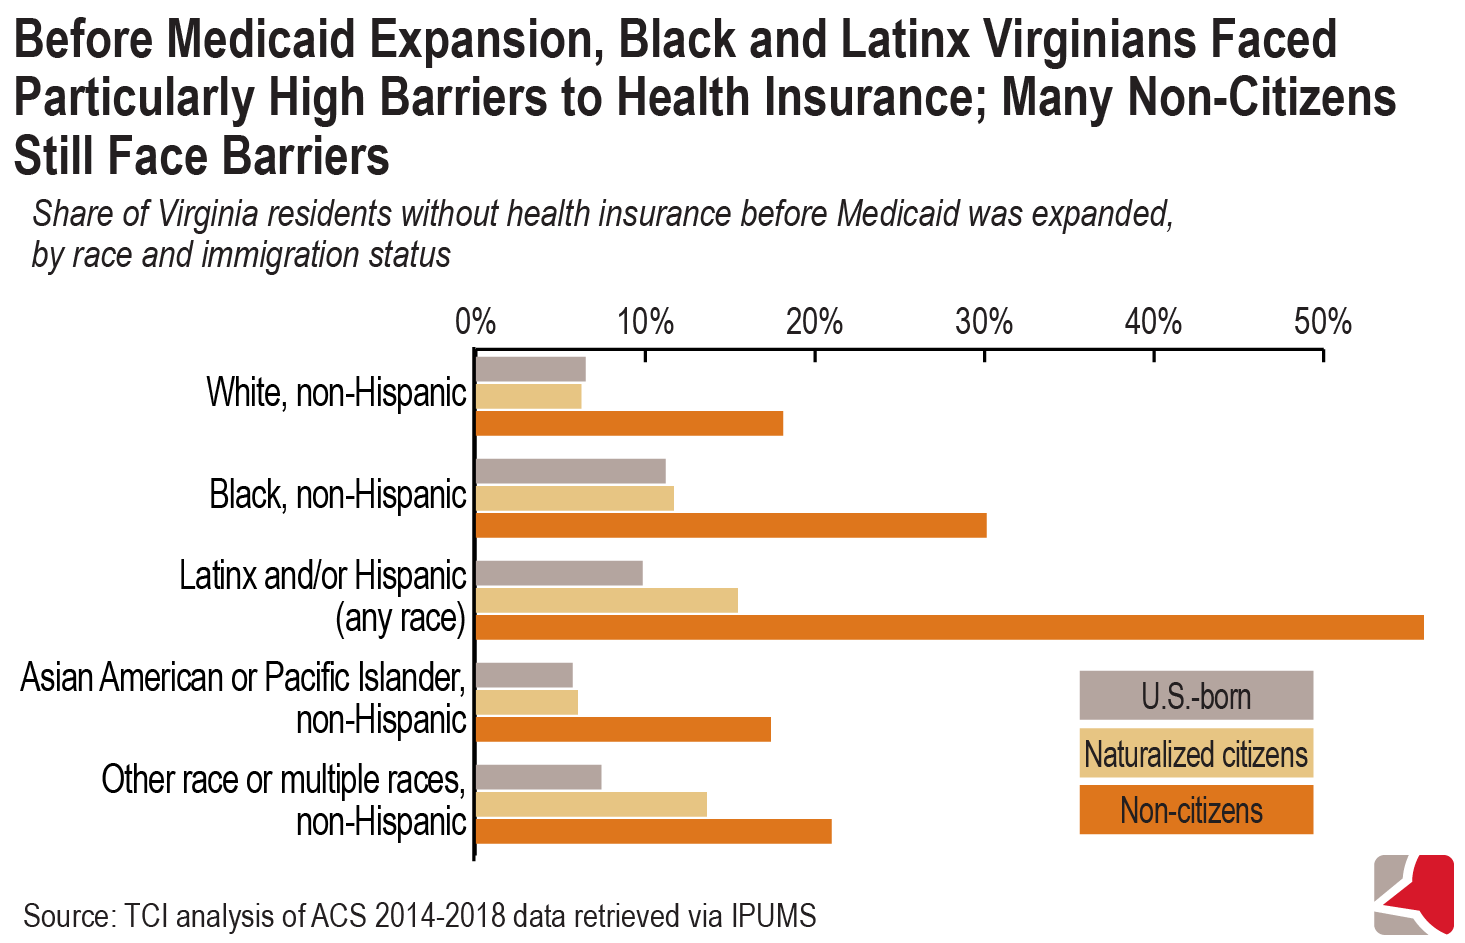 Bar graph showing the share of Virginia residents without health insurance before Medicaid was expanded, by race and immigration status.  Black and Latinx Virginians faced particularly high barriers to health insurance and were more likely to lack health insurance.  Many non-citizens still face barriers